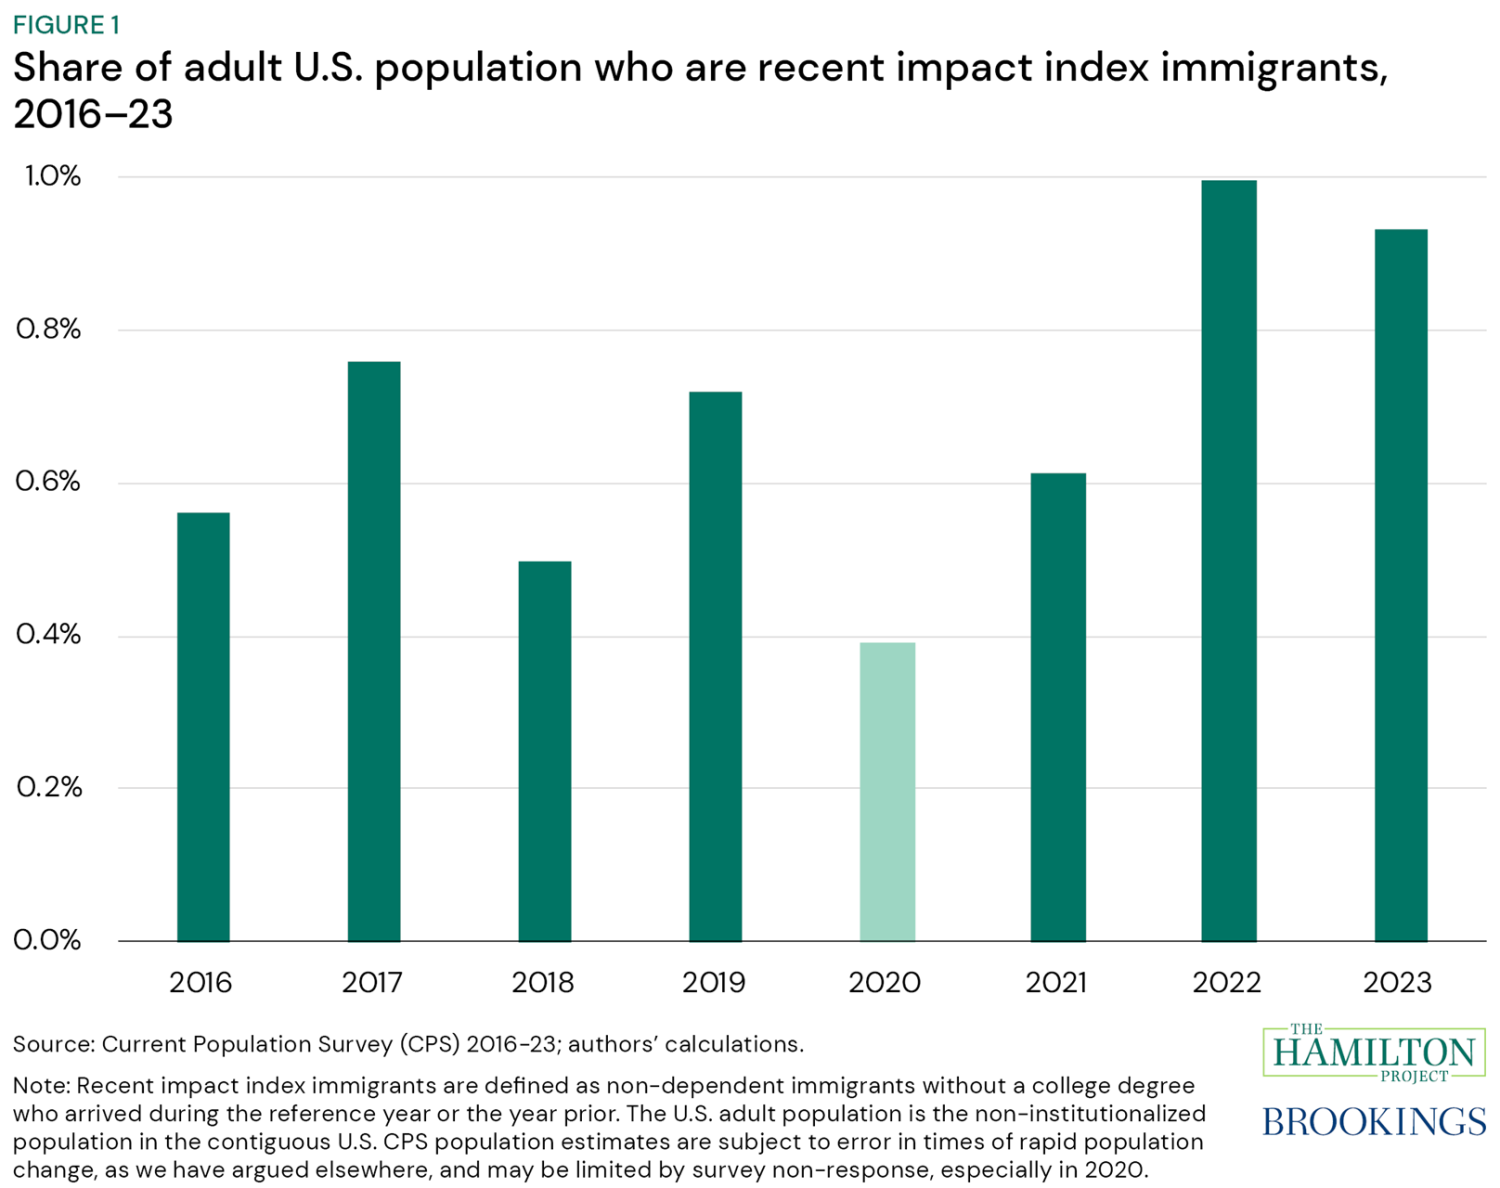 Figure 1: Share of adult U.S. population who are recent impact index immigrants, 2016-23. According to analysis of CPS data, recent impact index immigrants are a larger share of the population than before the pandemic.